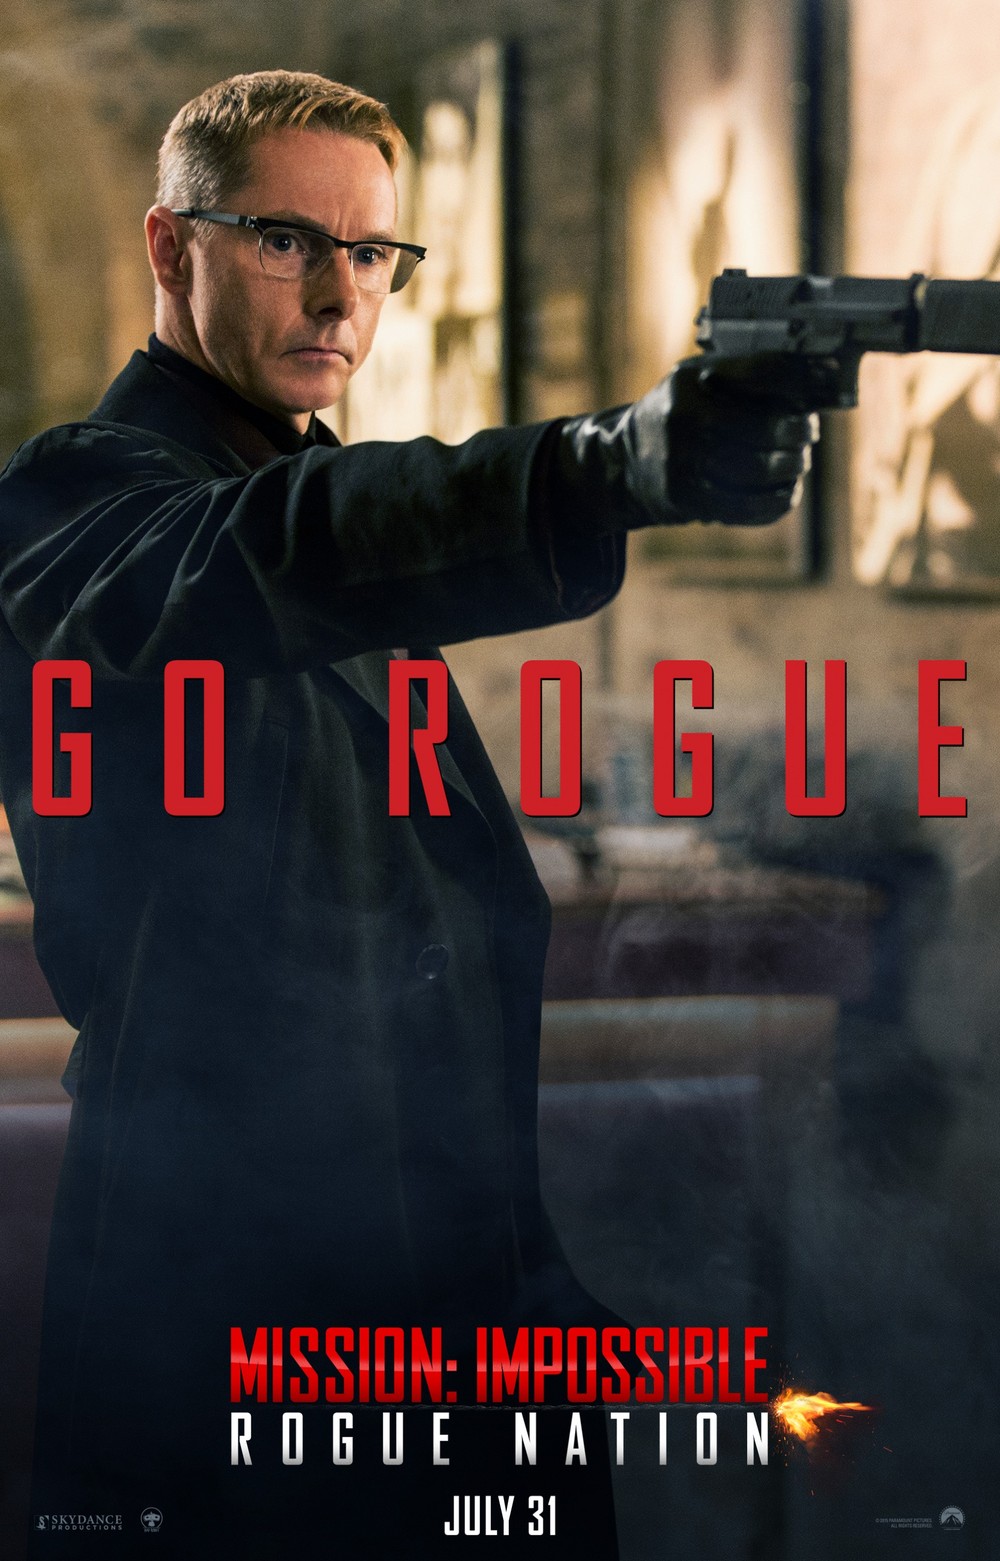 Mission impossible 5 dvd release date